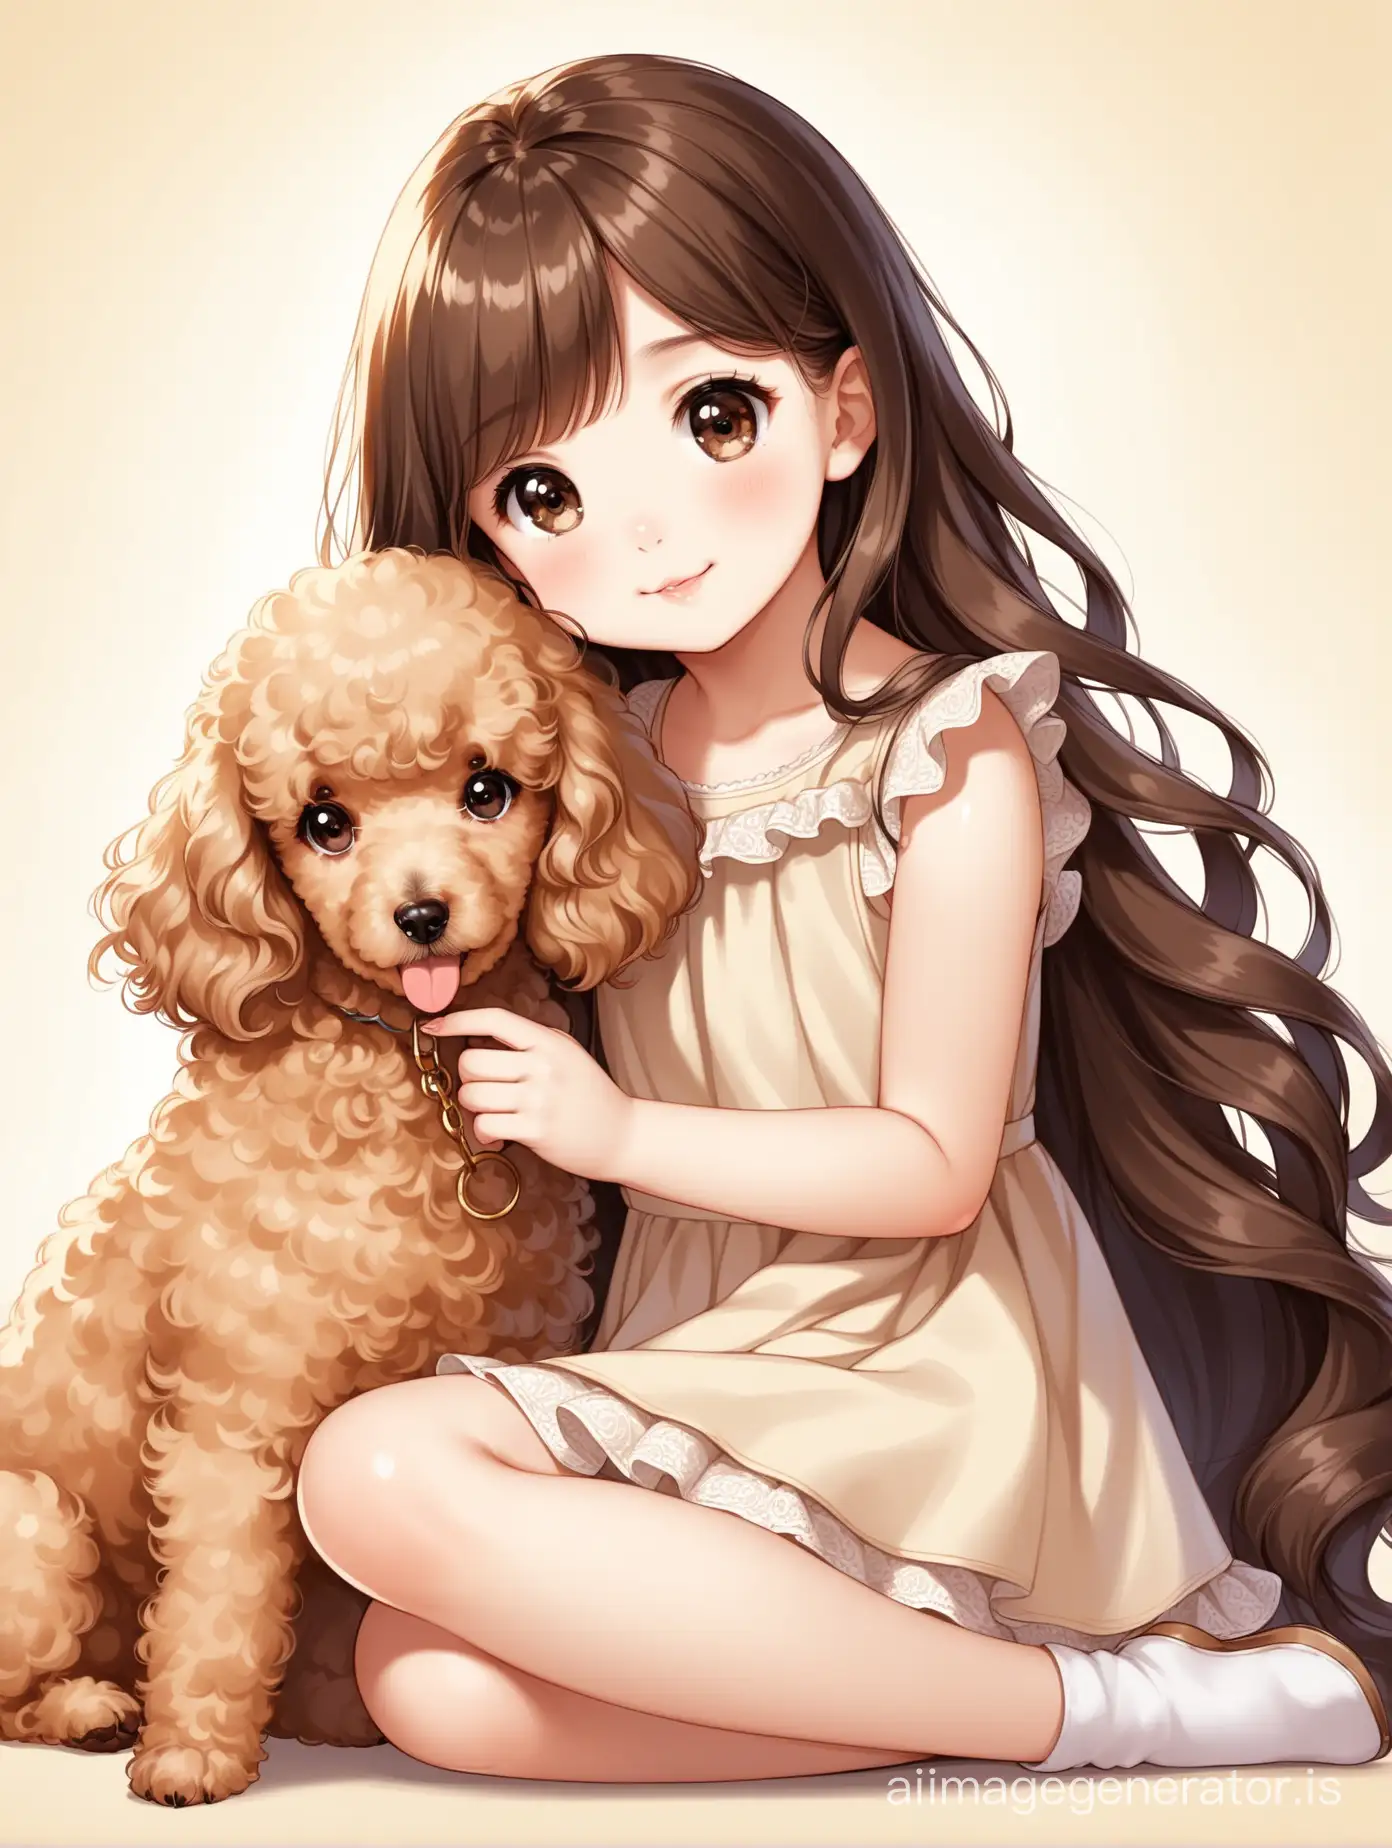 playful and cute little girl with dark brown eyes and very long hair sitting with a beige-colored poodle puppy